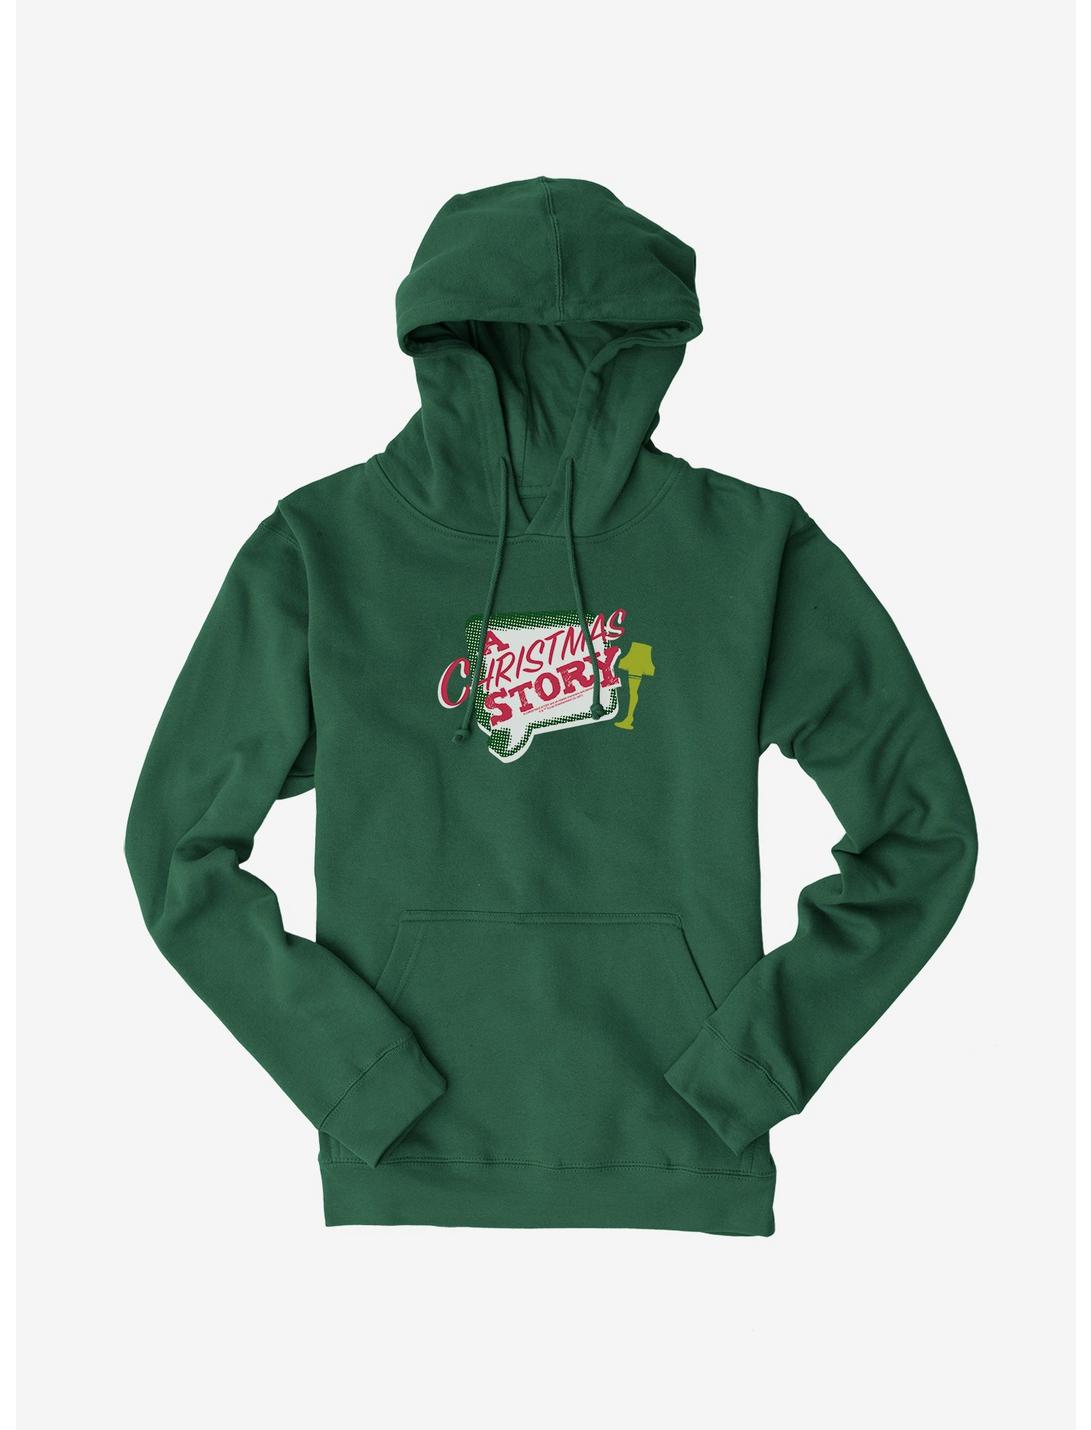 A Christmas Story  Lamp Bubble  Hoodie, FOREST, hi-res